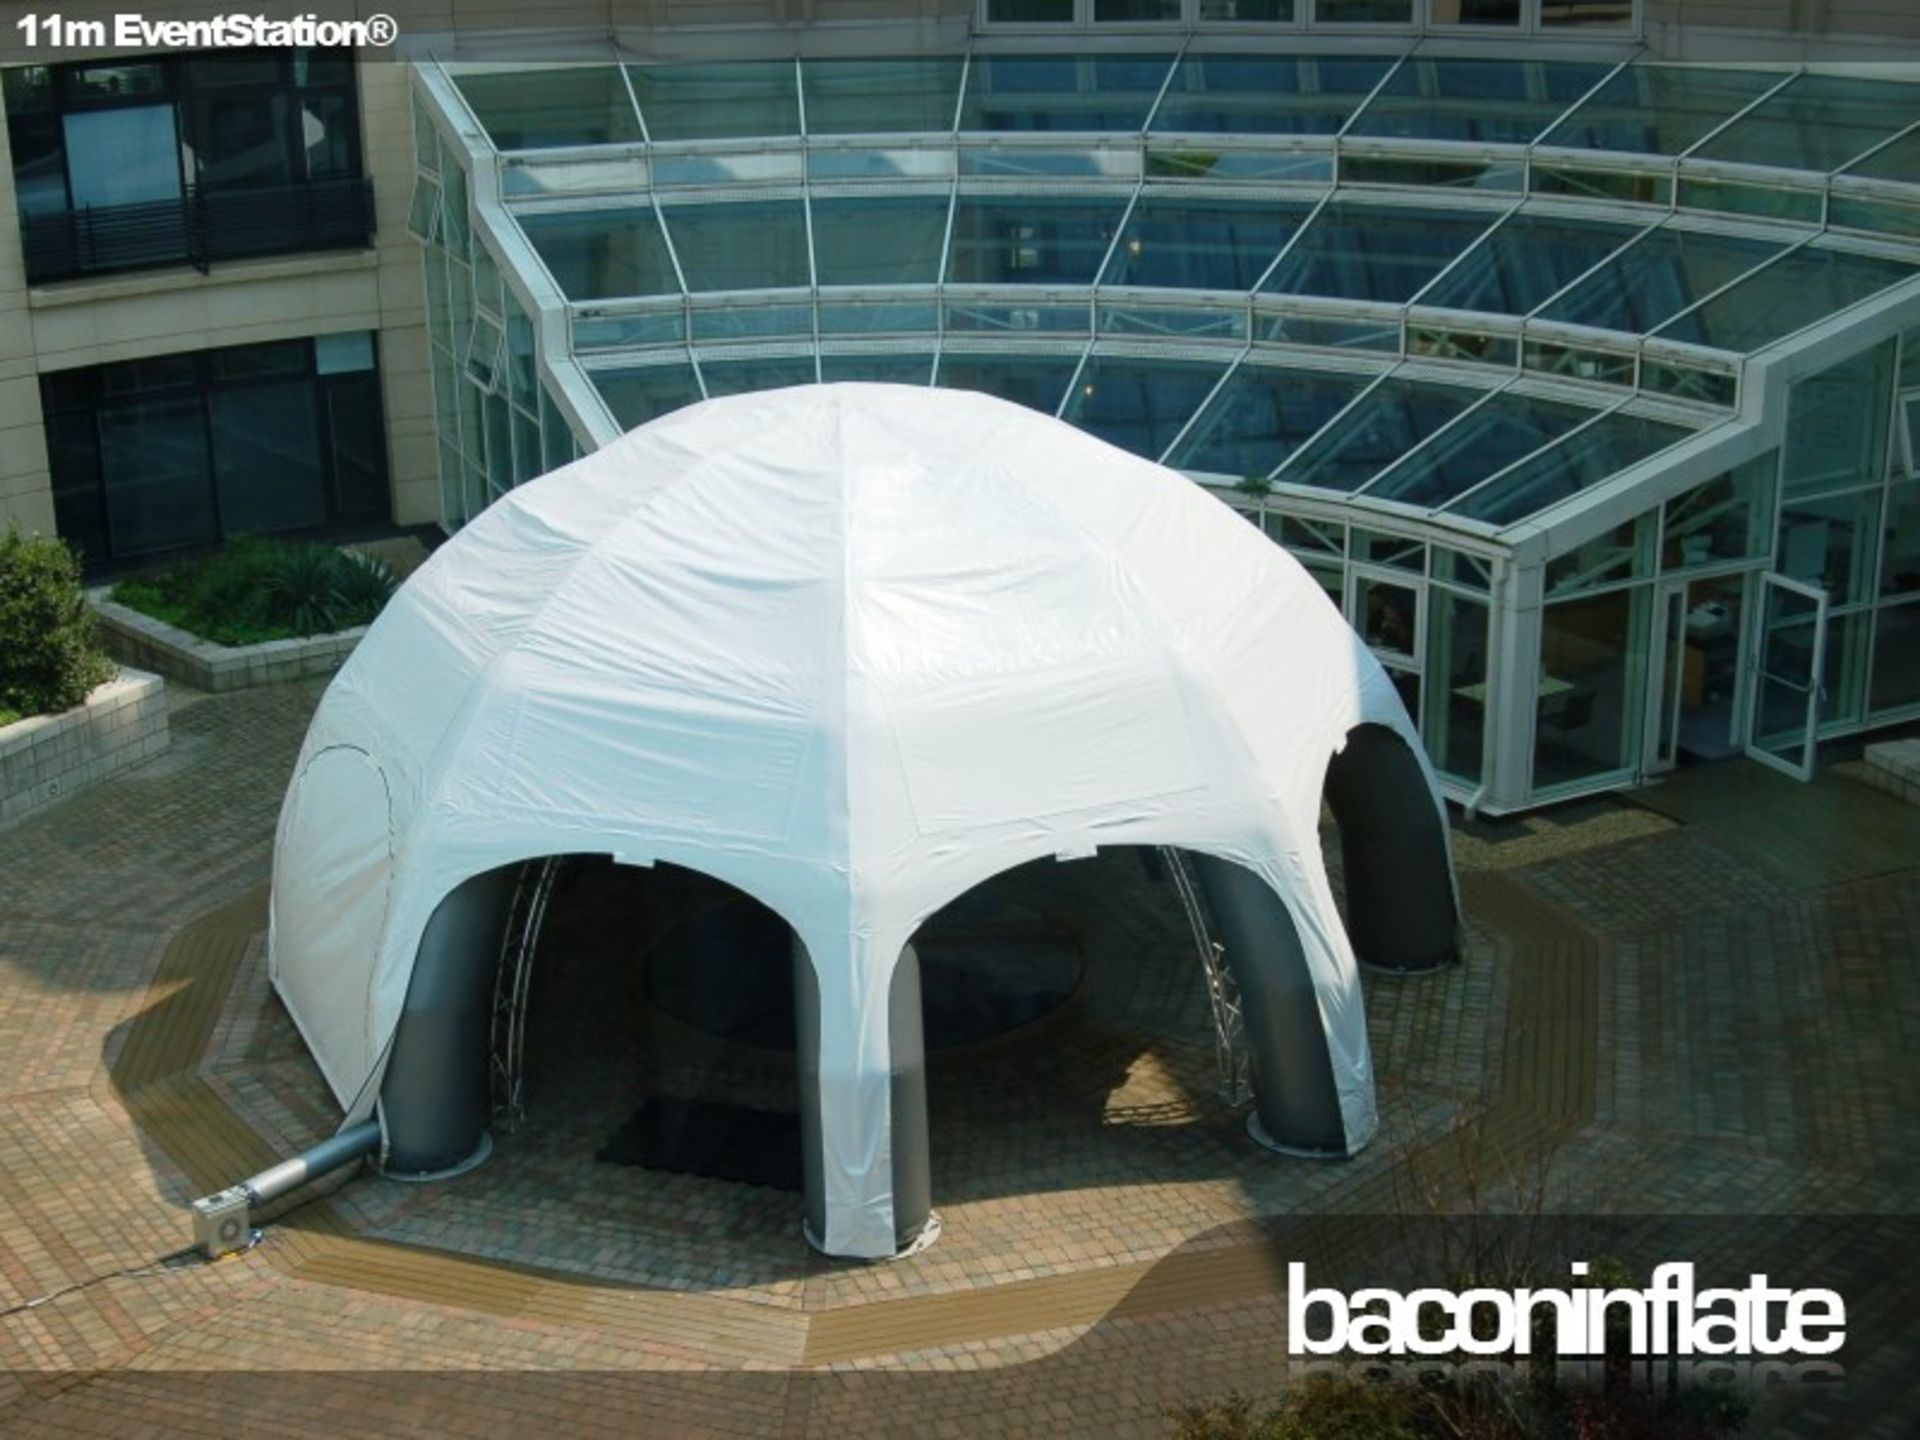 11m EventStation Leg Unit Inflatable Structure without canopy - CL573 - Location: Leicester LE1Stock